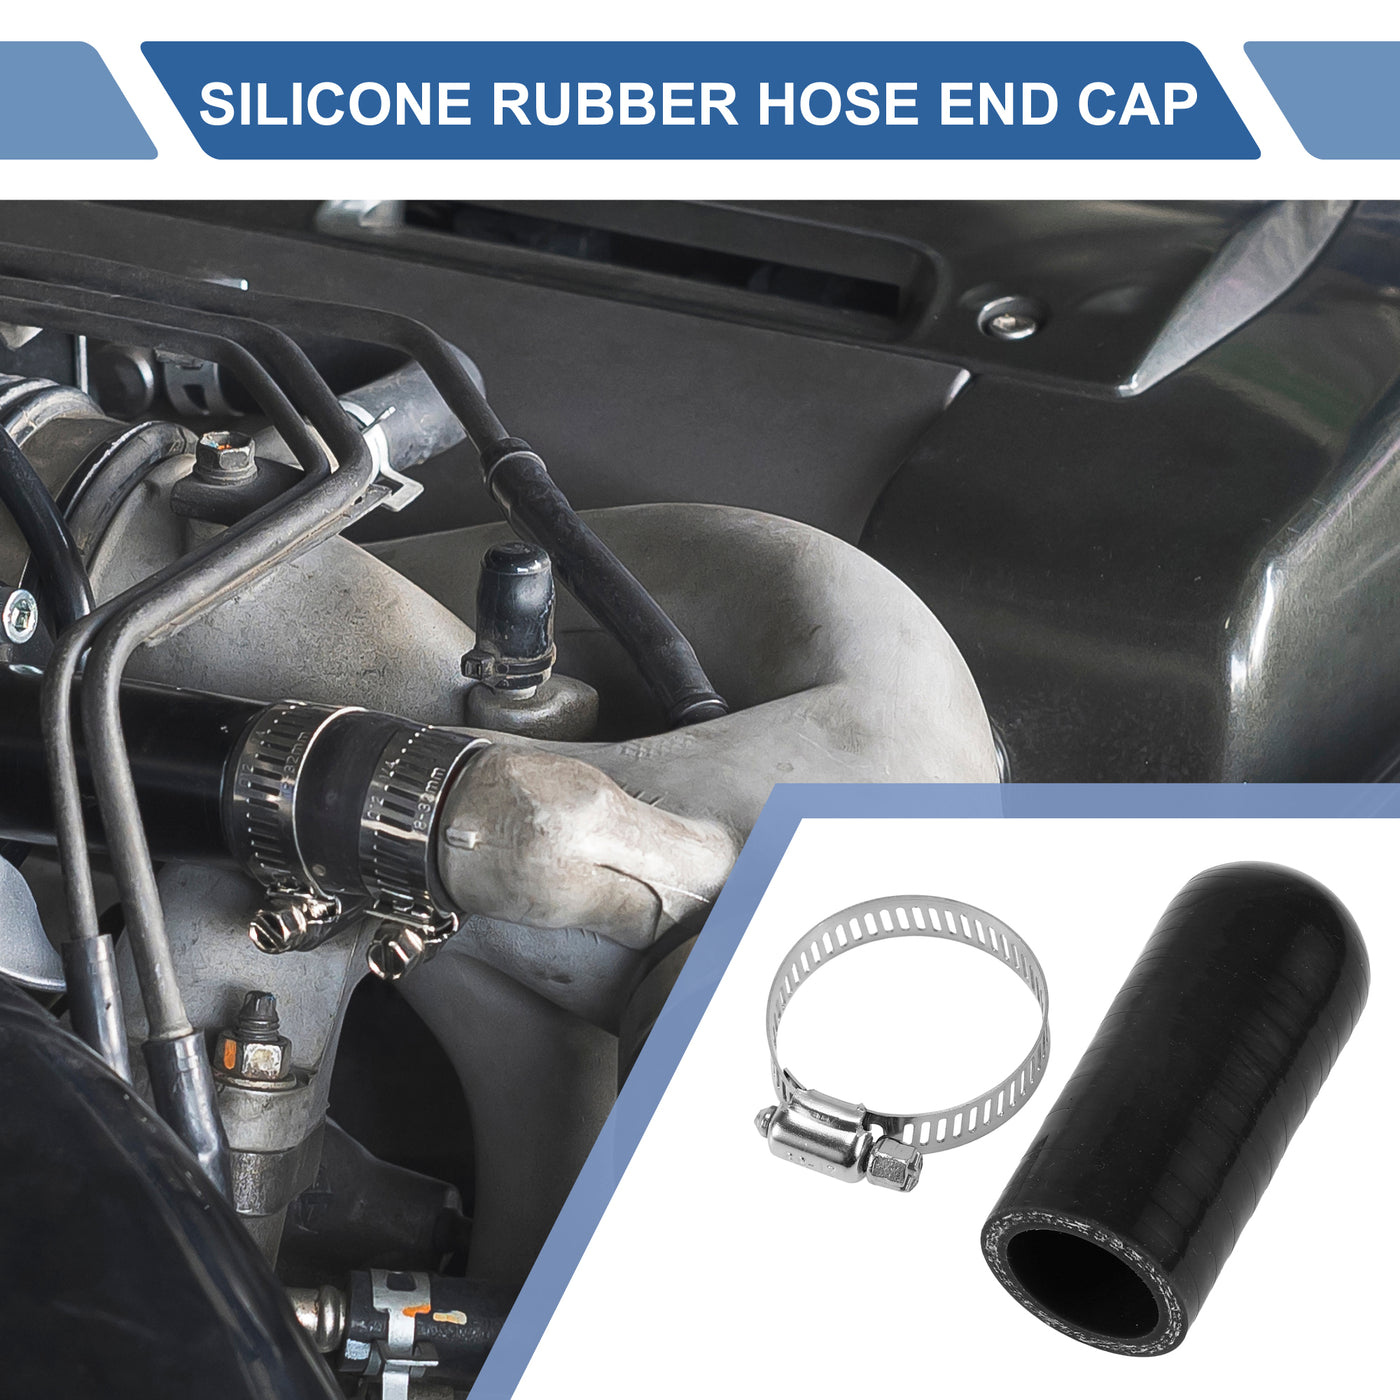 X AUTOHAUX 1 Pcs 60mm Length 25mm/0.98" ID Black Car Silicone Rubber Hose End Cap with Clamp Silicone Reinforced Blanking Cap for Bypass Tube Universal